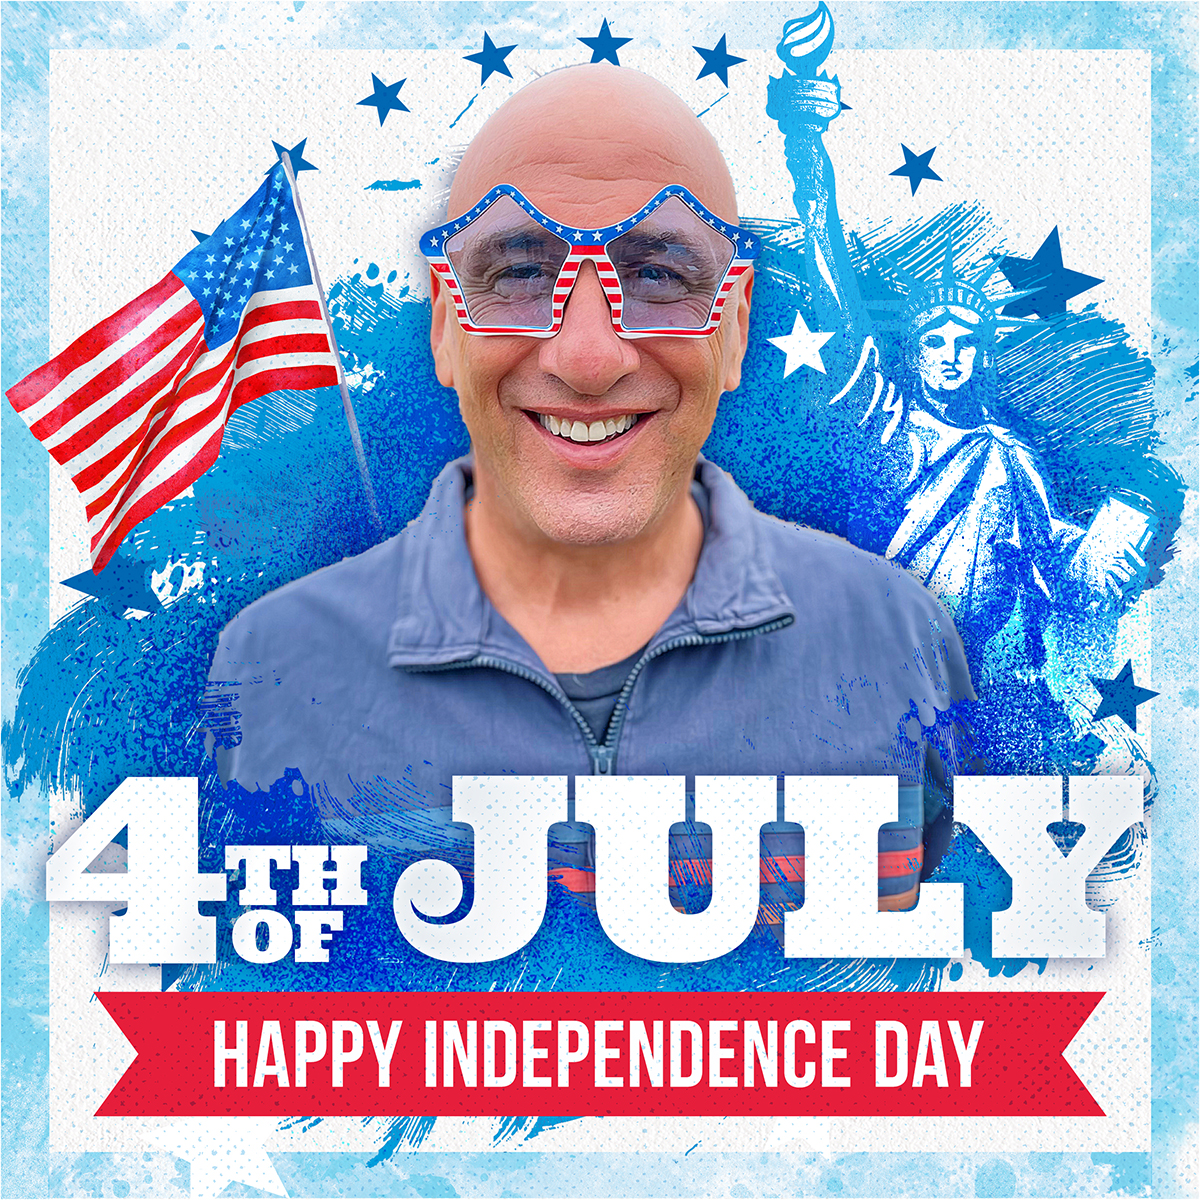 4th of July - Happy Independence Day!